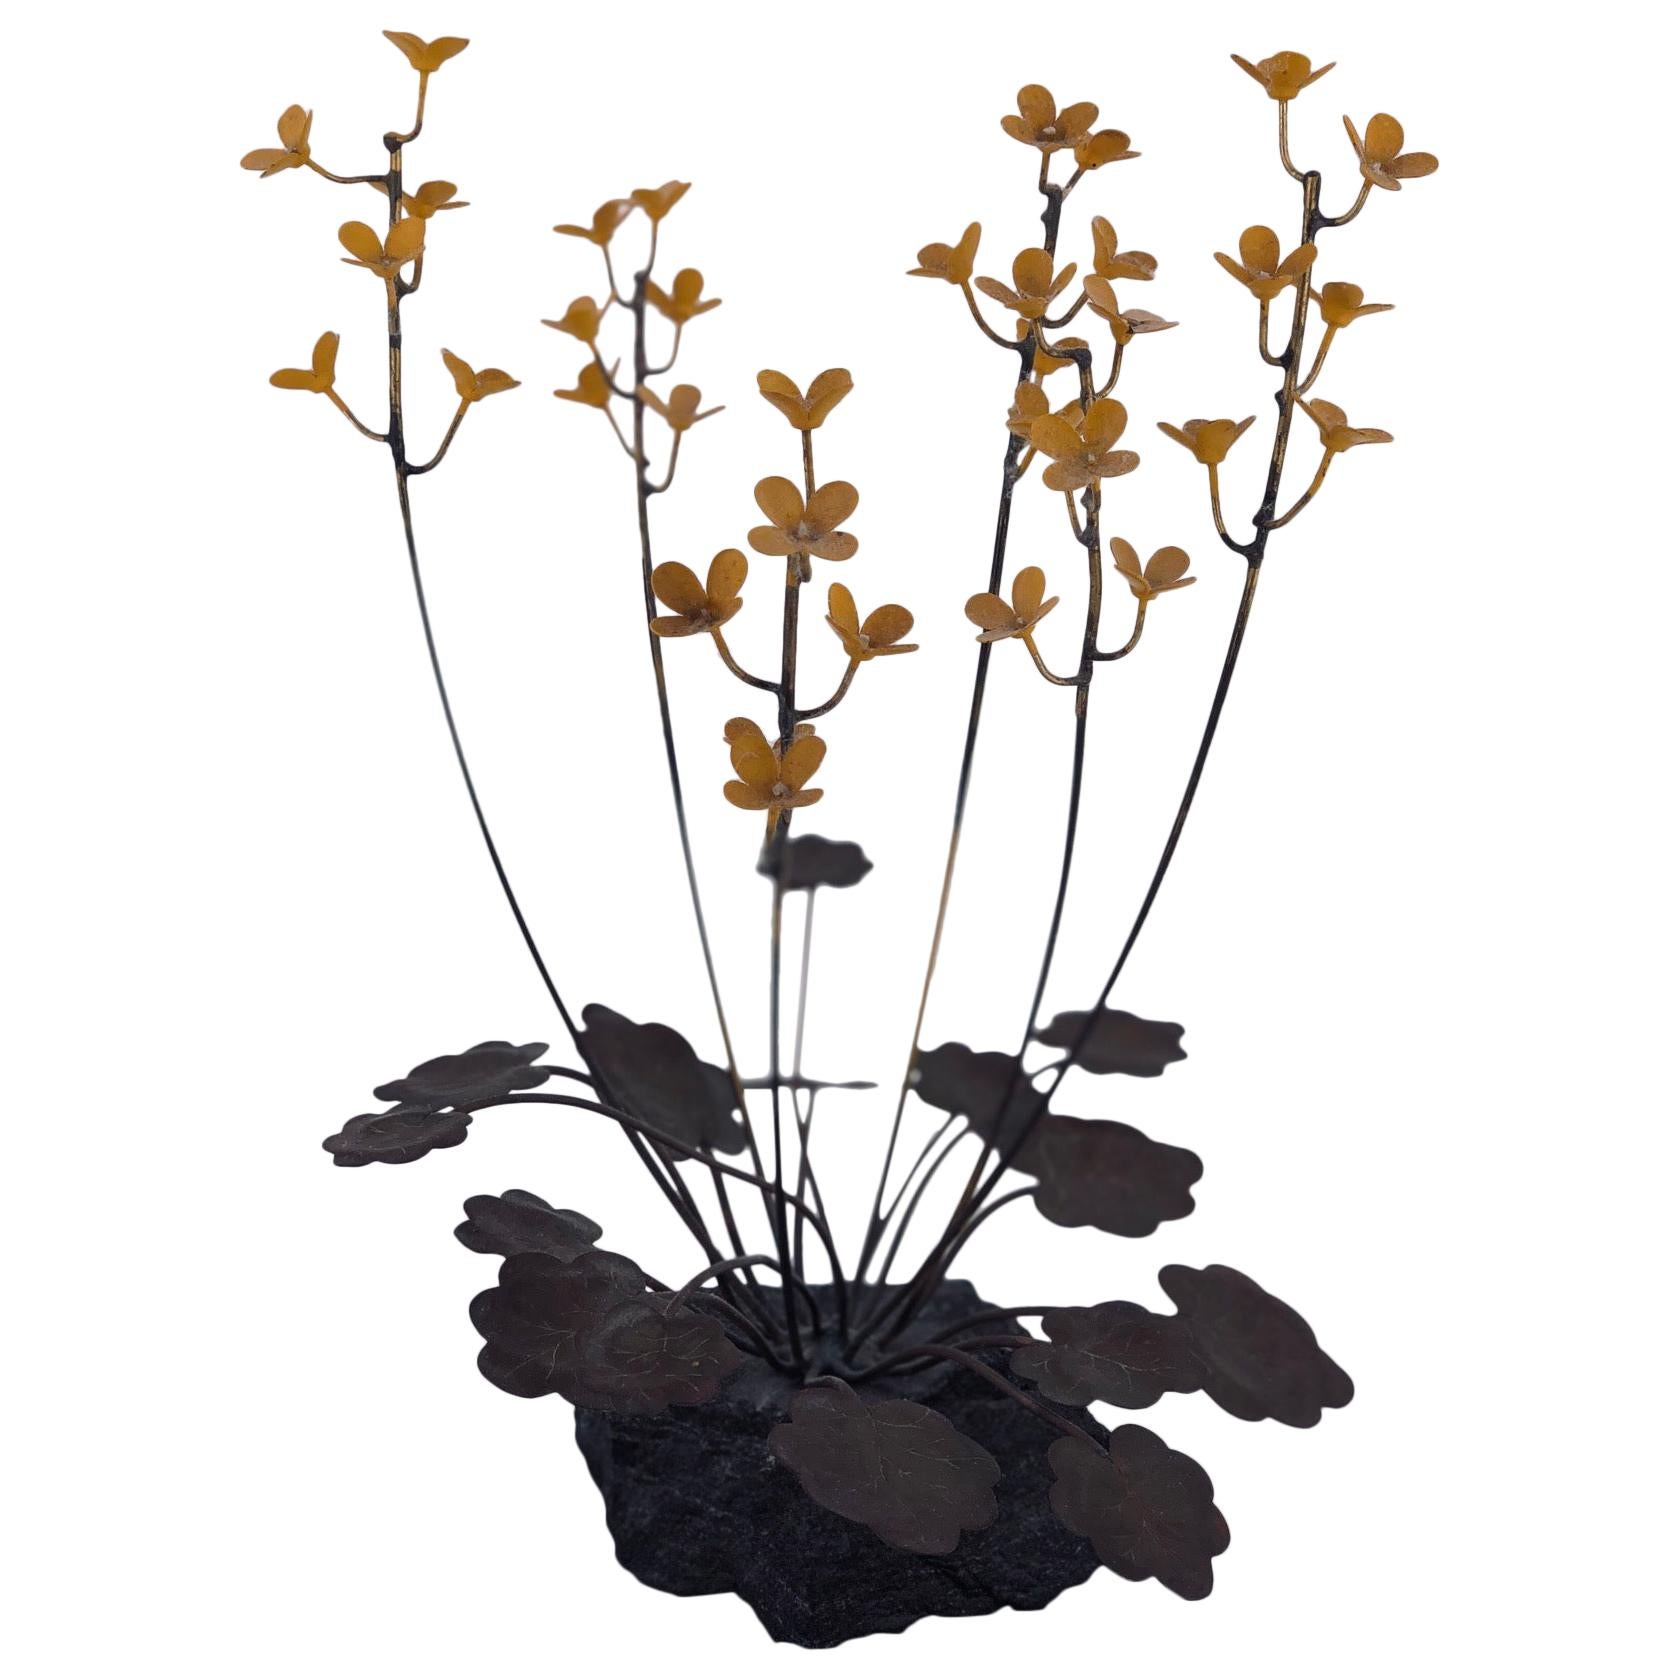 Brass and Enamel Flowers Sculpture Sitting in Stone Base Jere Style